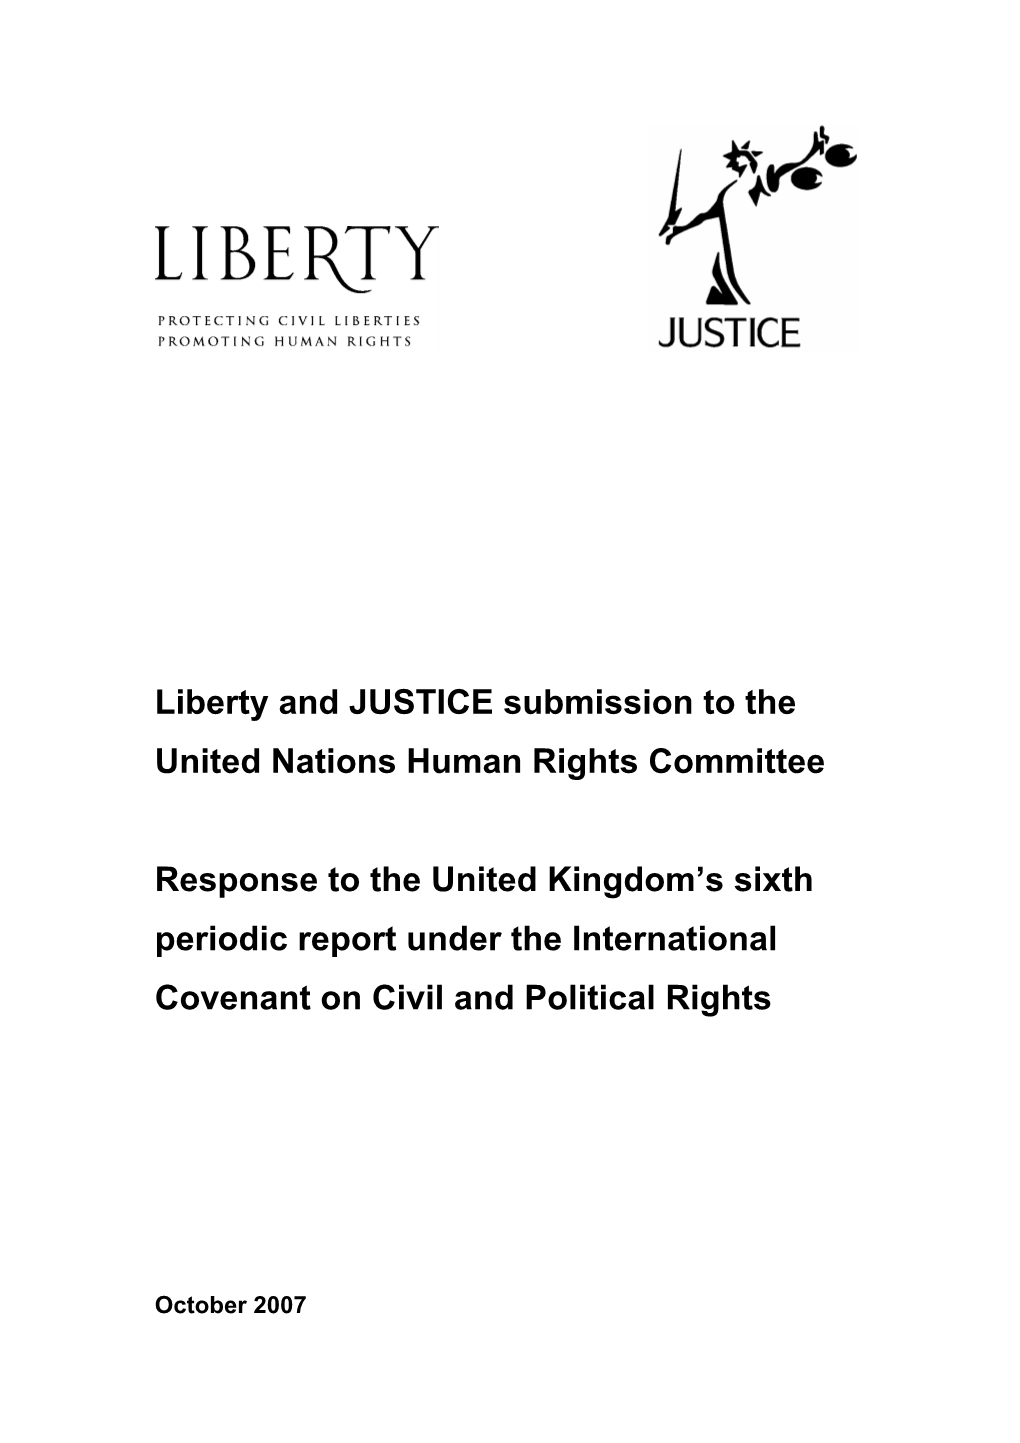 Liberty and JUSTICE Submission to the United Nations Human Rights Committee